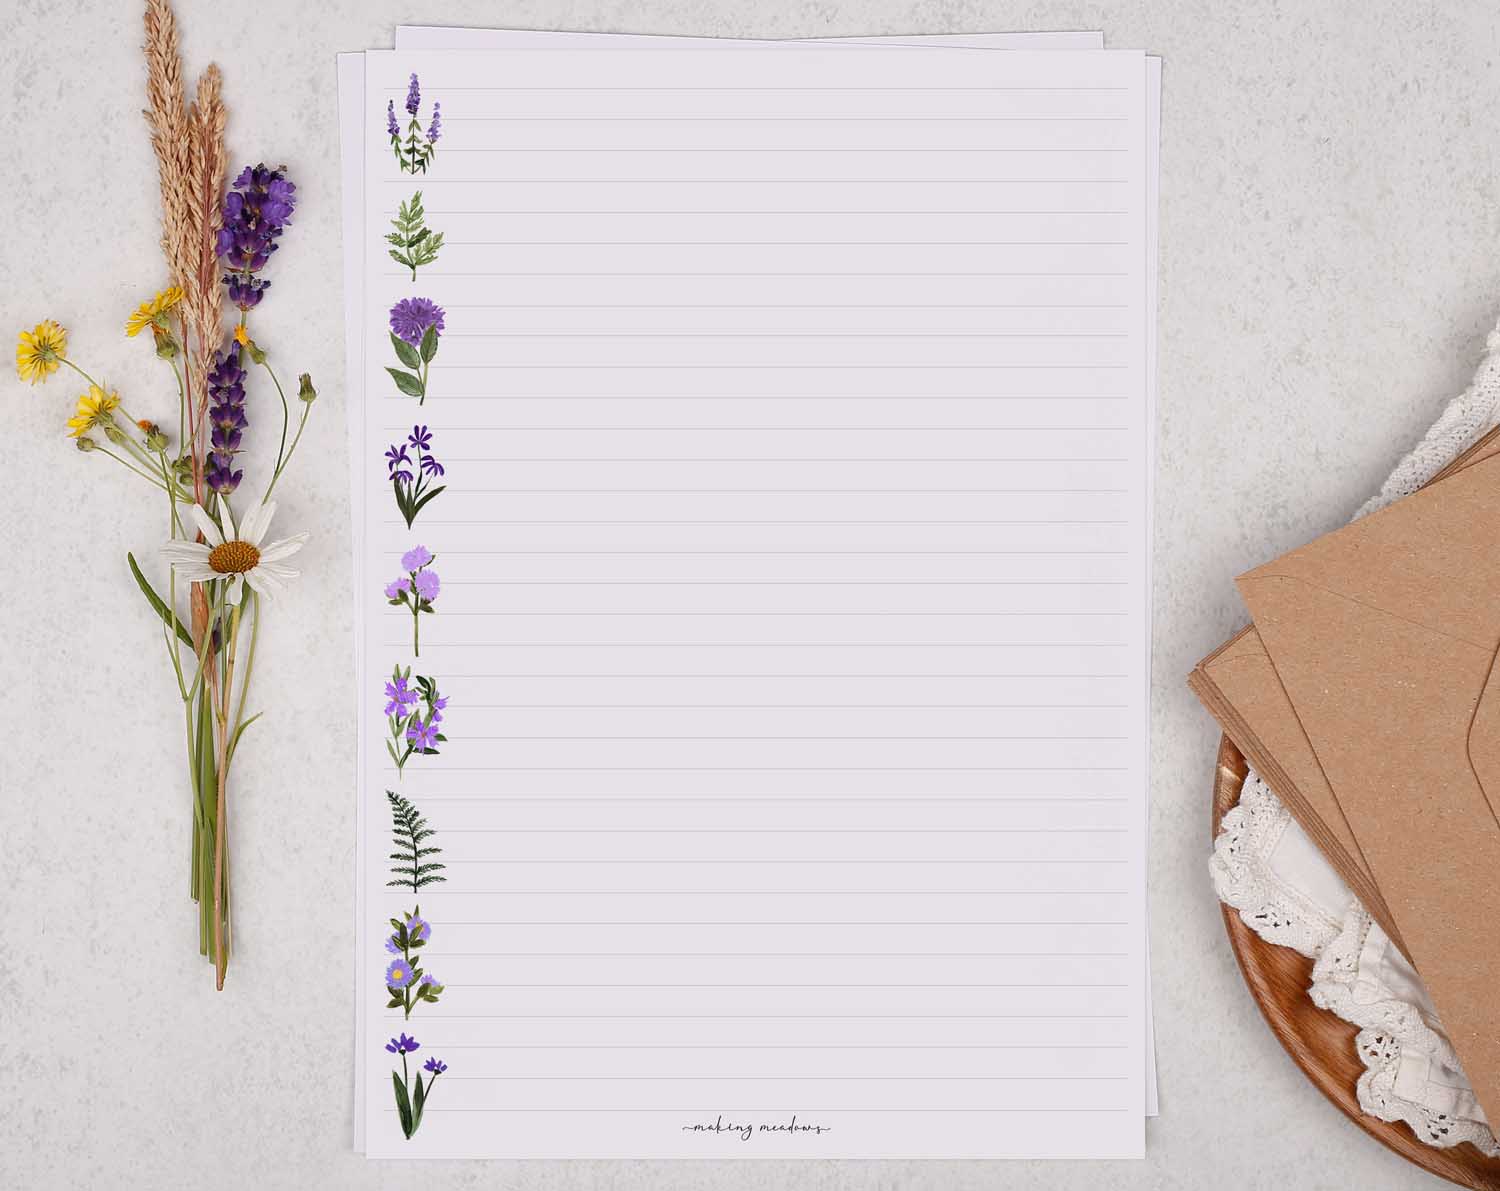 A4 letter writing paper sheets with a purple flower border around the letter paper in a delicate flower pattern.